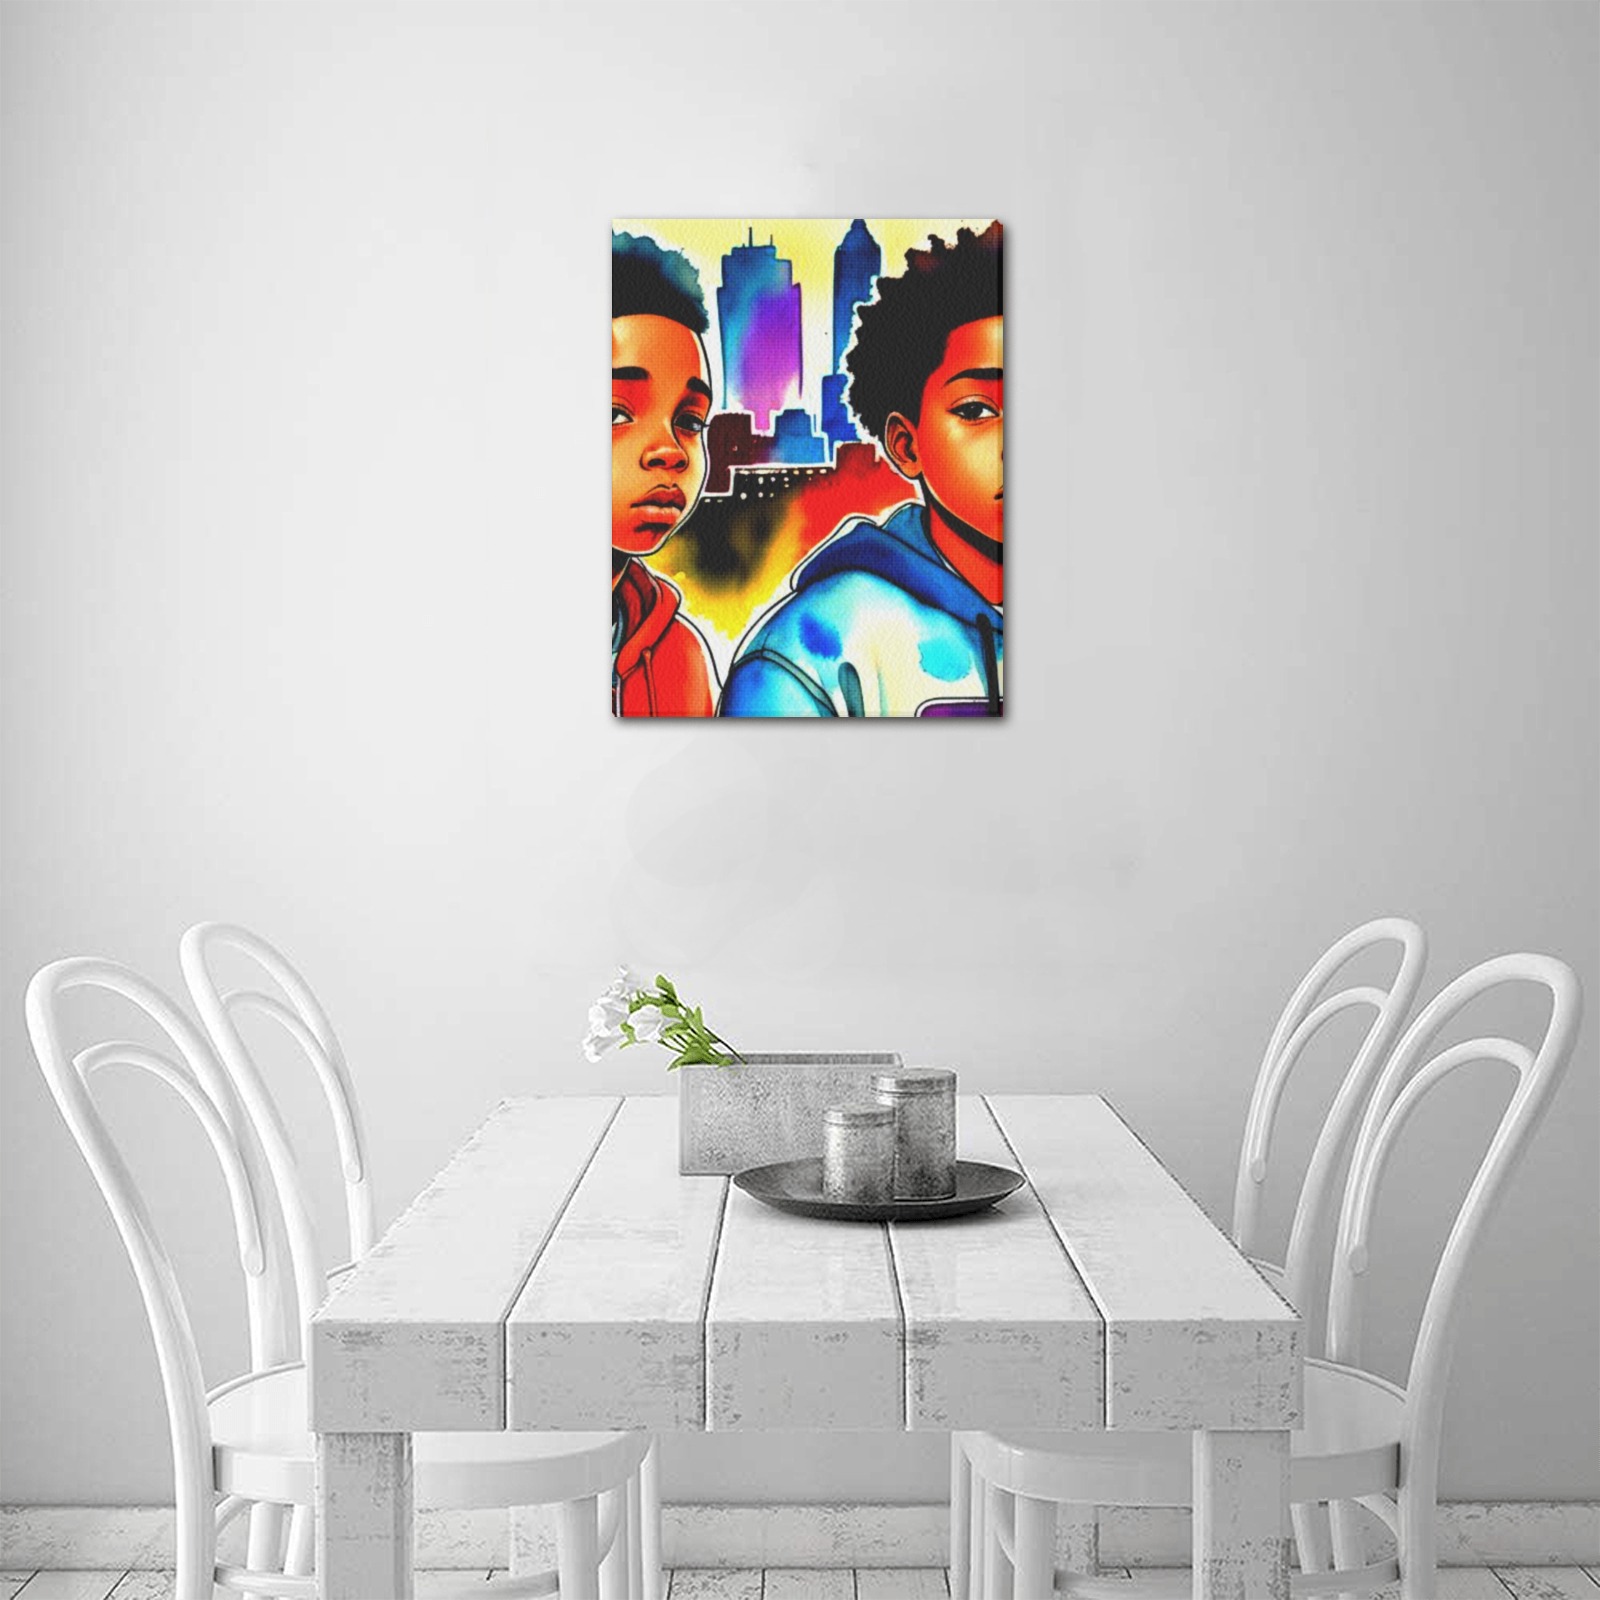 KIDS IN AMERICA 2 Upgraded Canvas Print 11"x14"